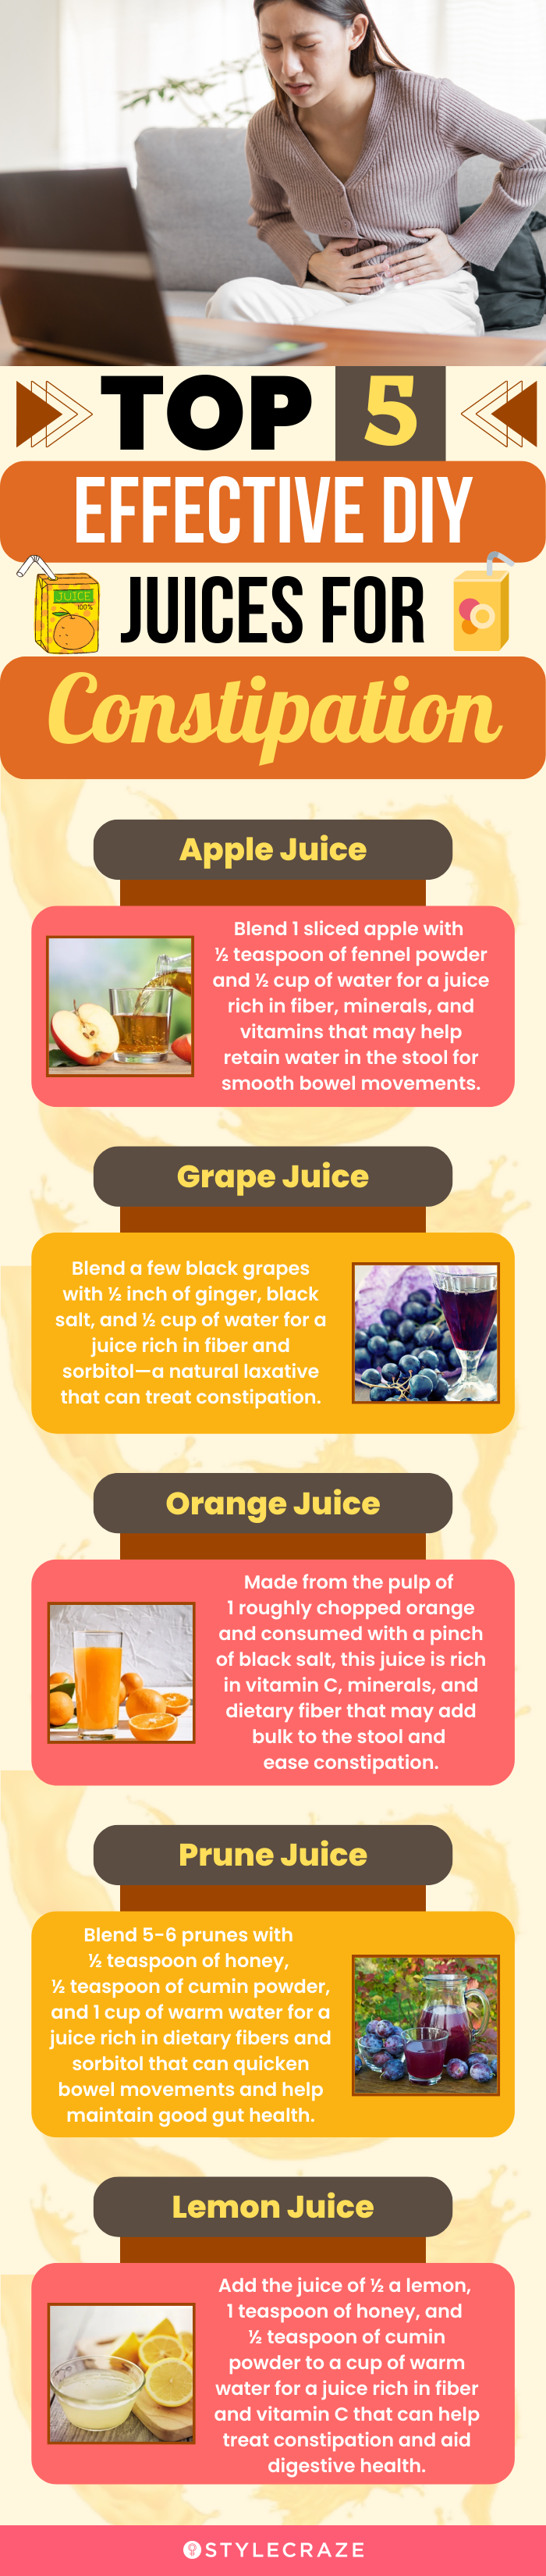 8 Best Juices For Constipation – Home-Made Recipes, Dosage, And Benefits  